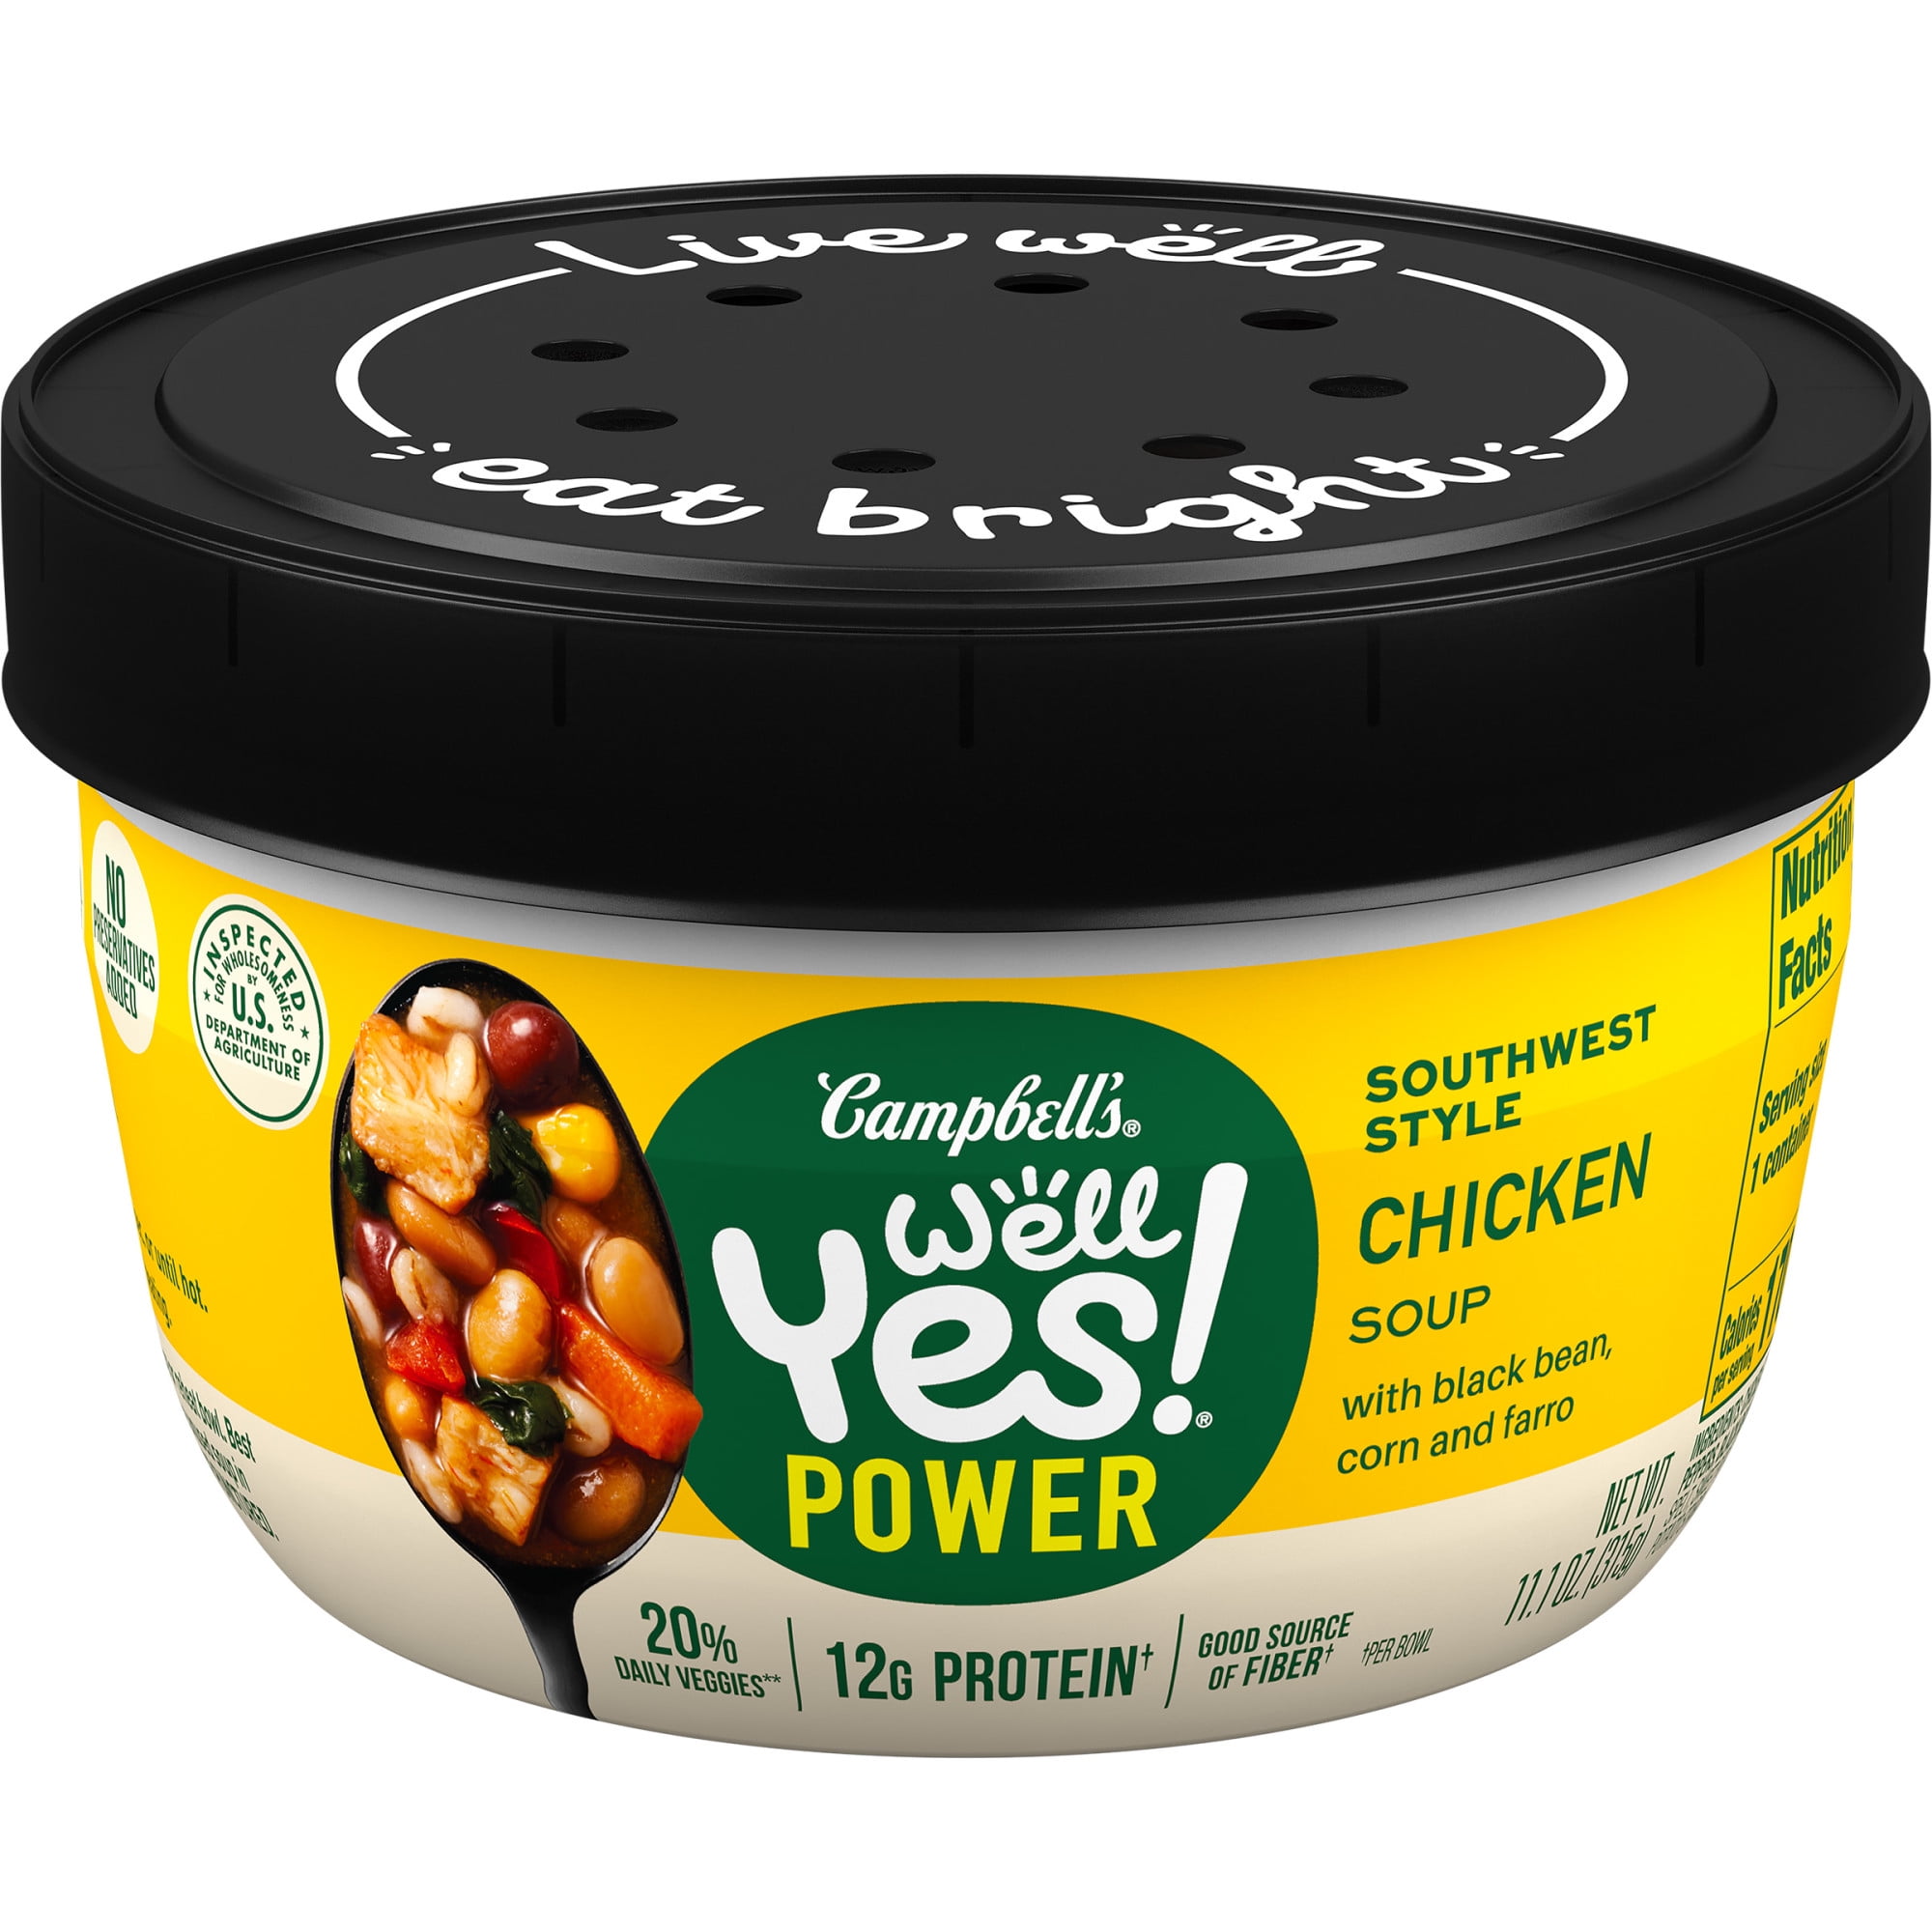 Campbell's Well Yes! Power Soup Bowl Southwest Style Chicken Soup with Bone Broth, 11.1 Oz Microwavable Bowl